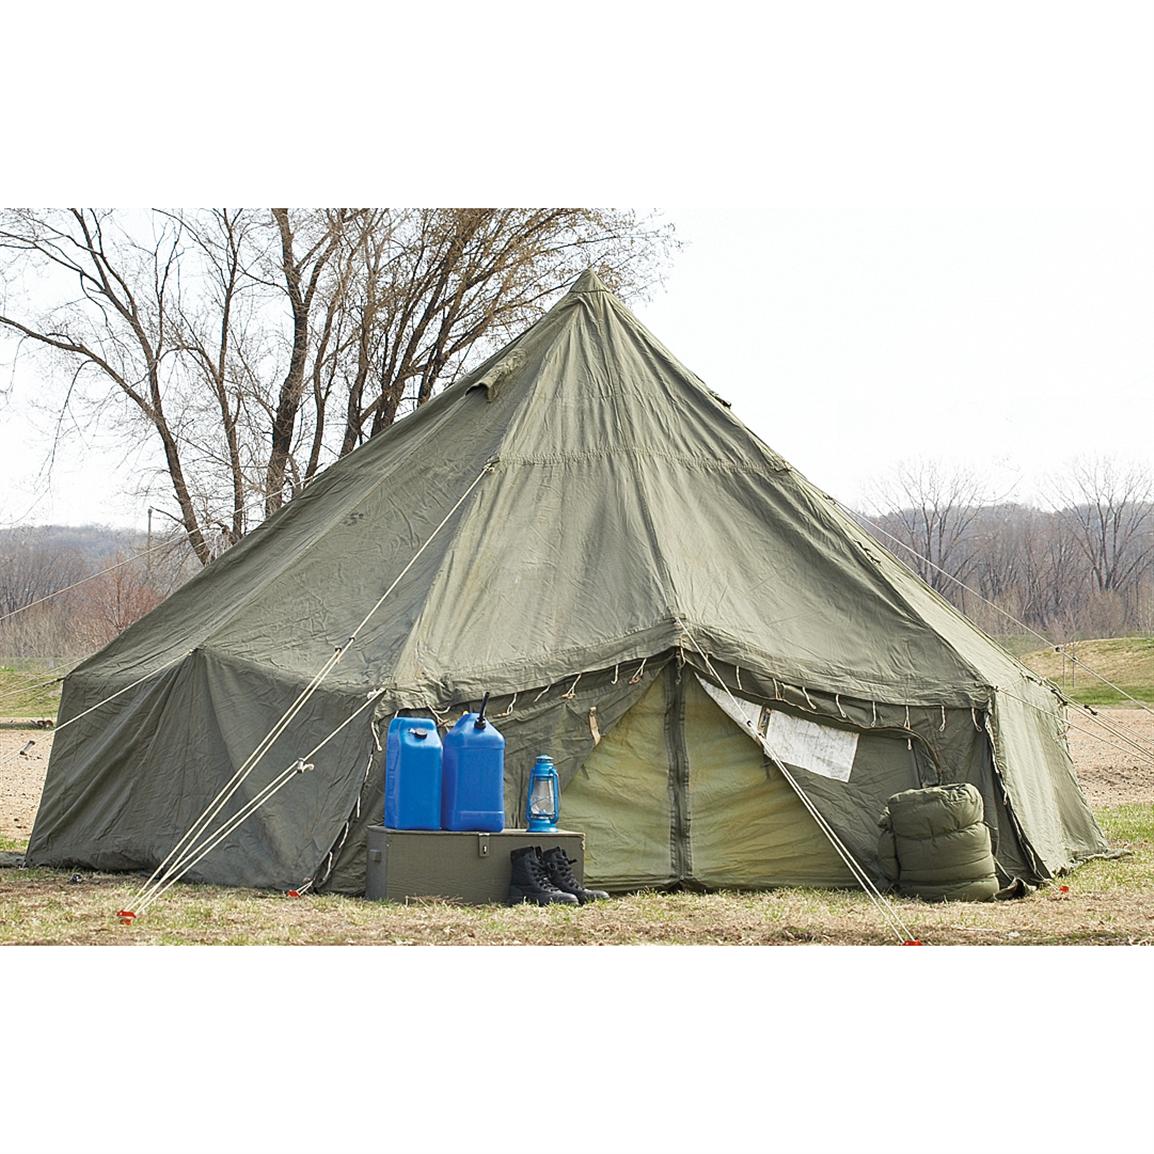 Army Surplus Canvas Tents - Army Military